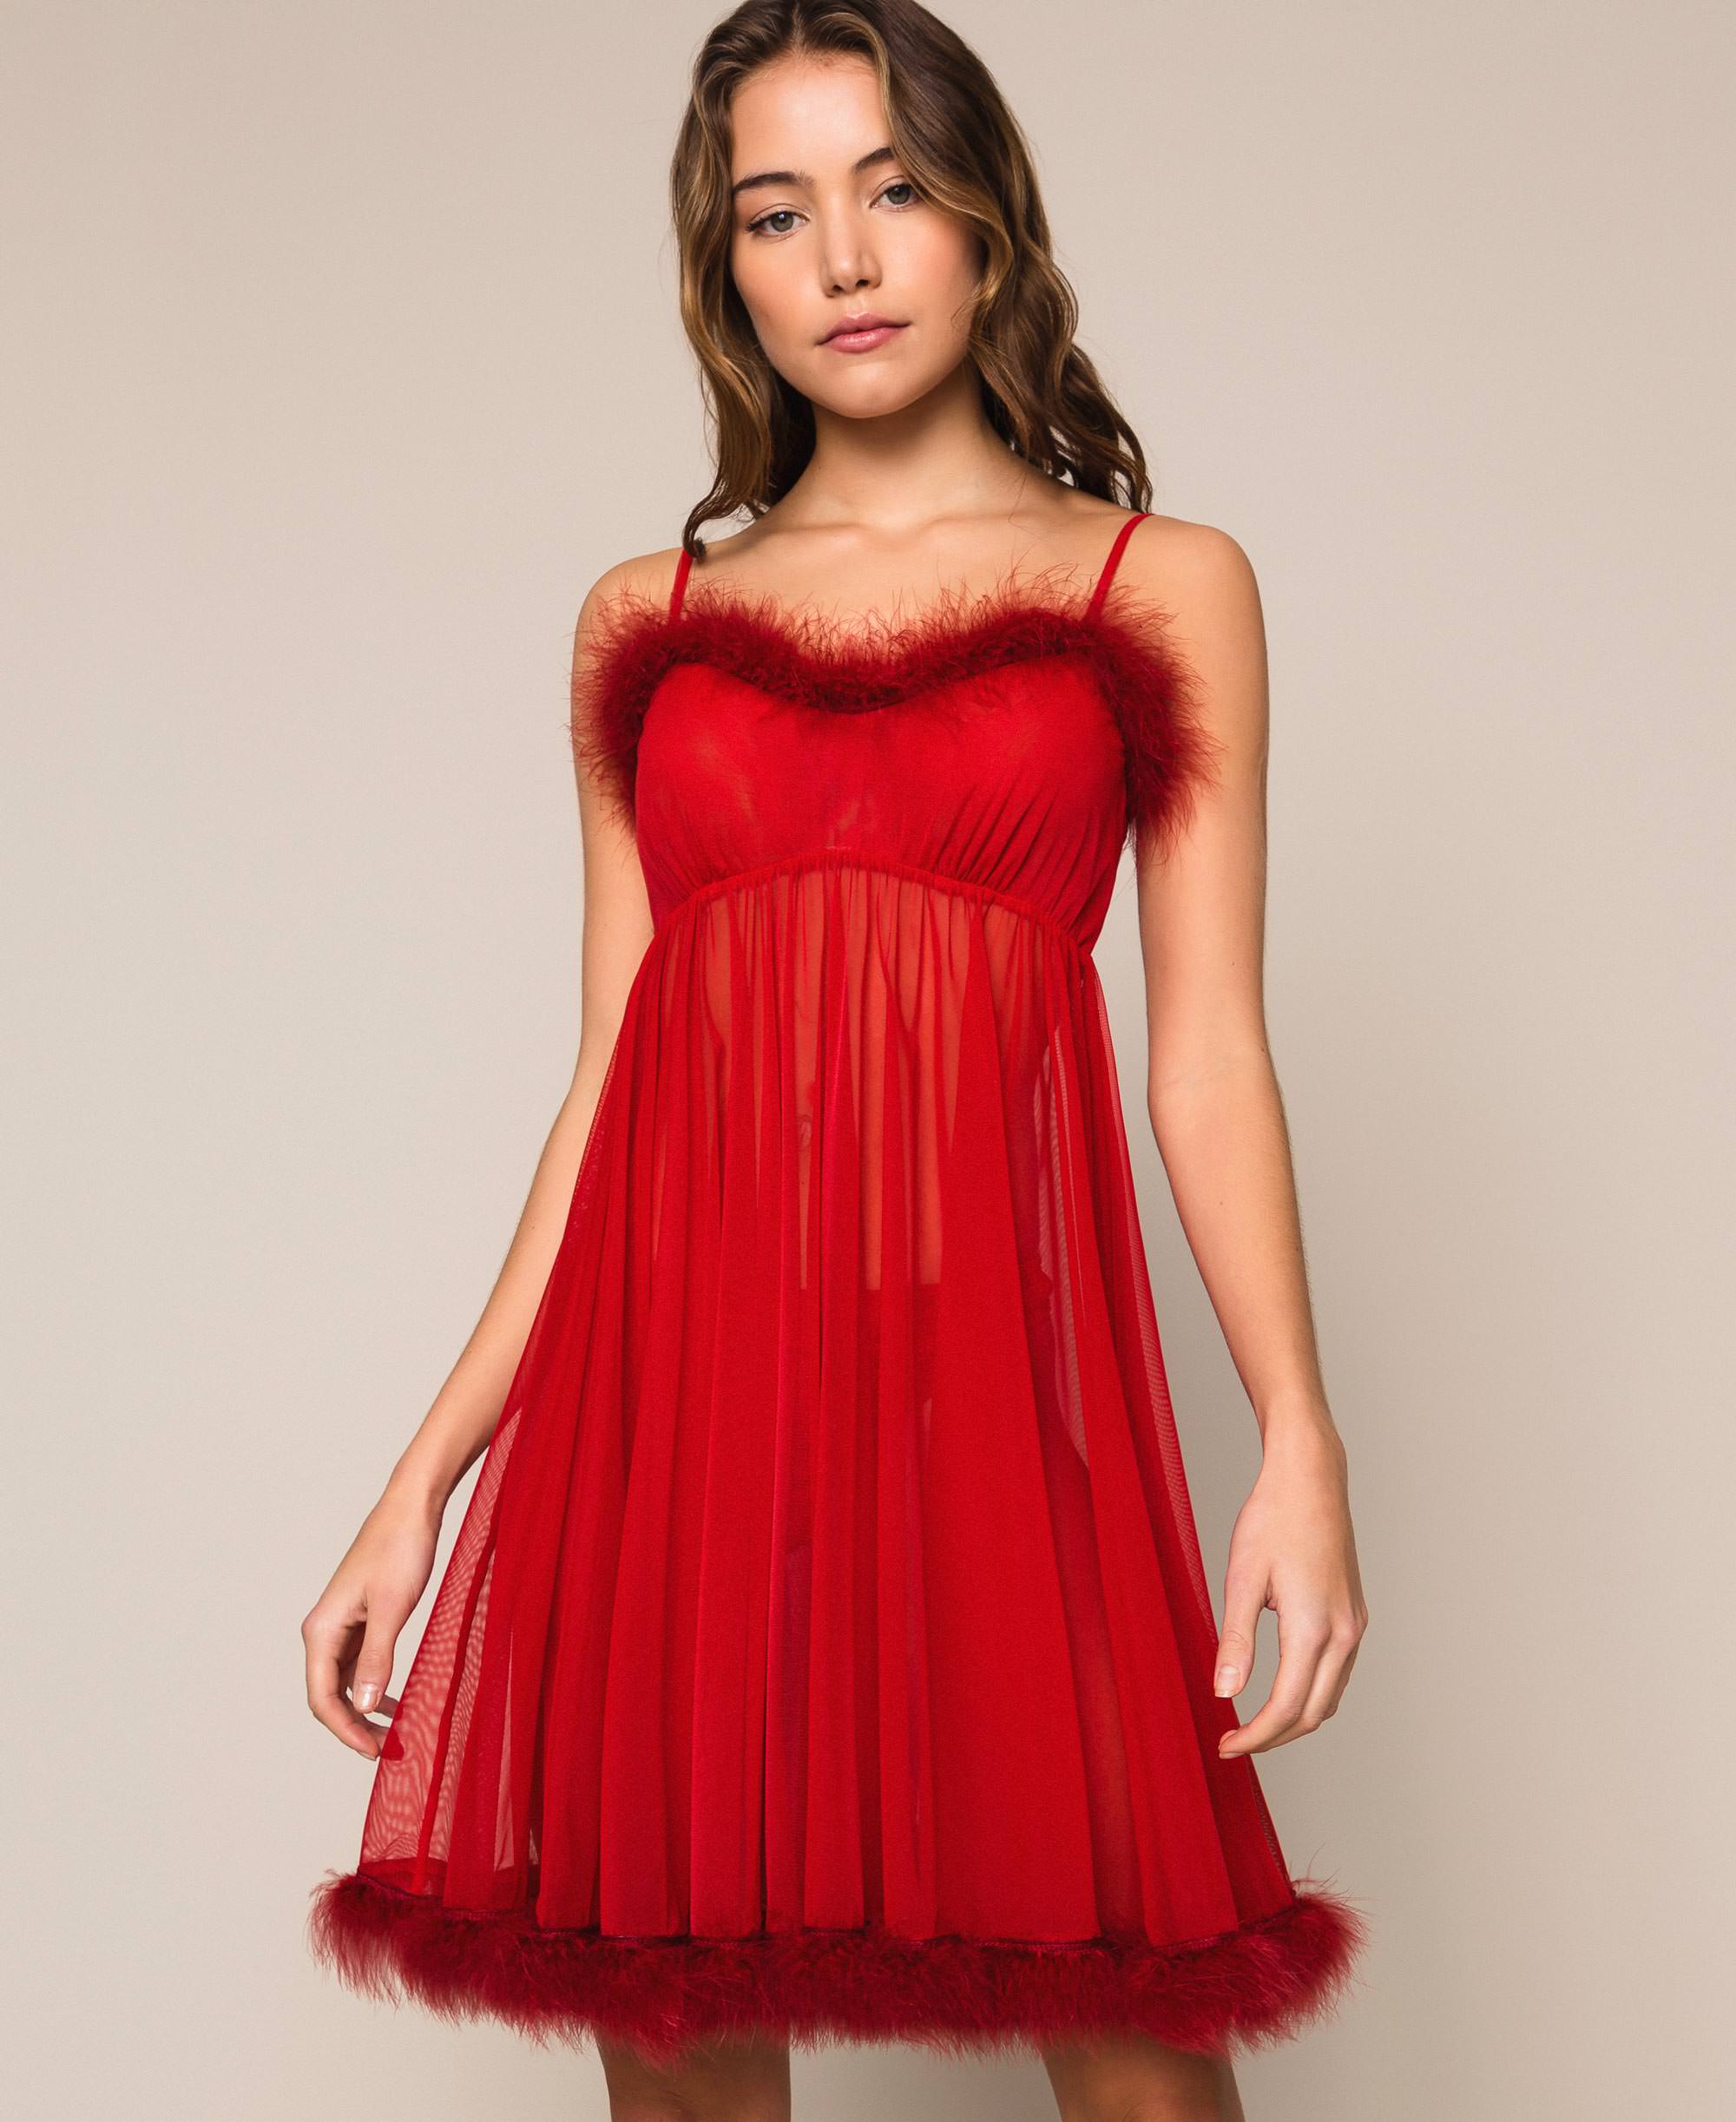 Tulle babydoll dress with feathers ...